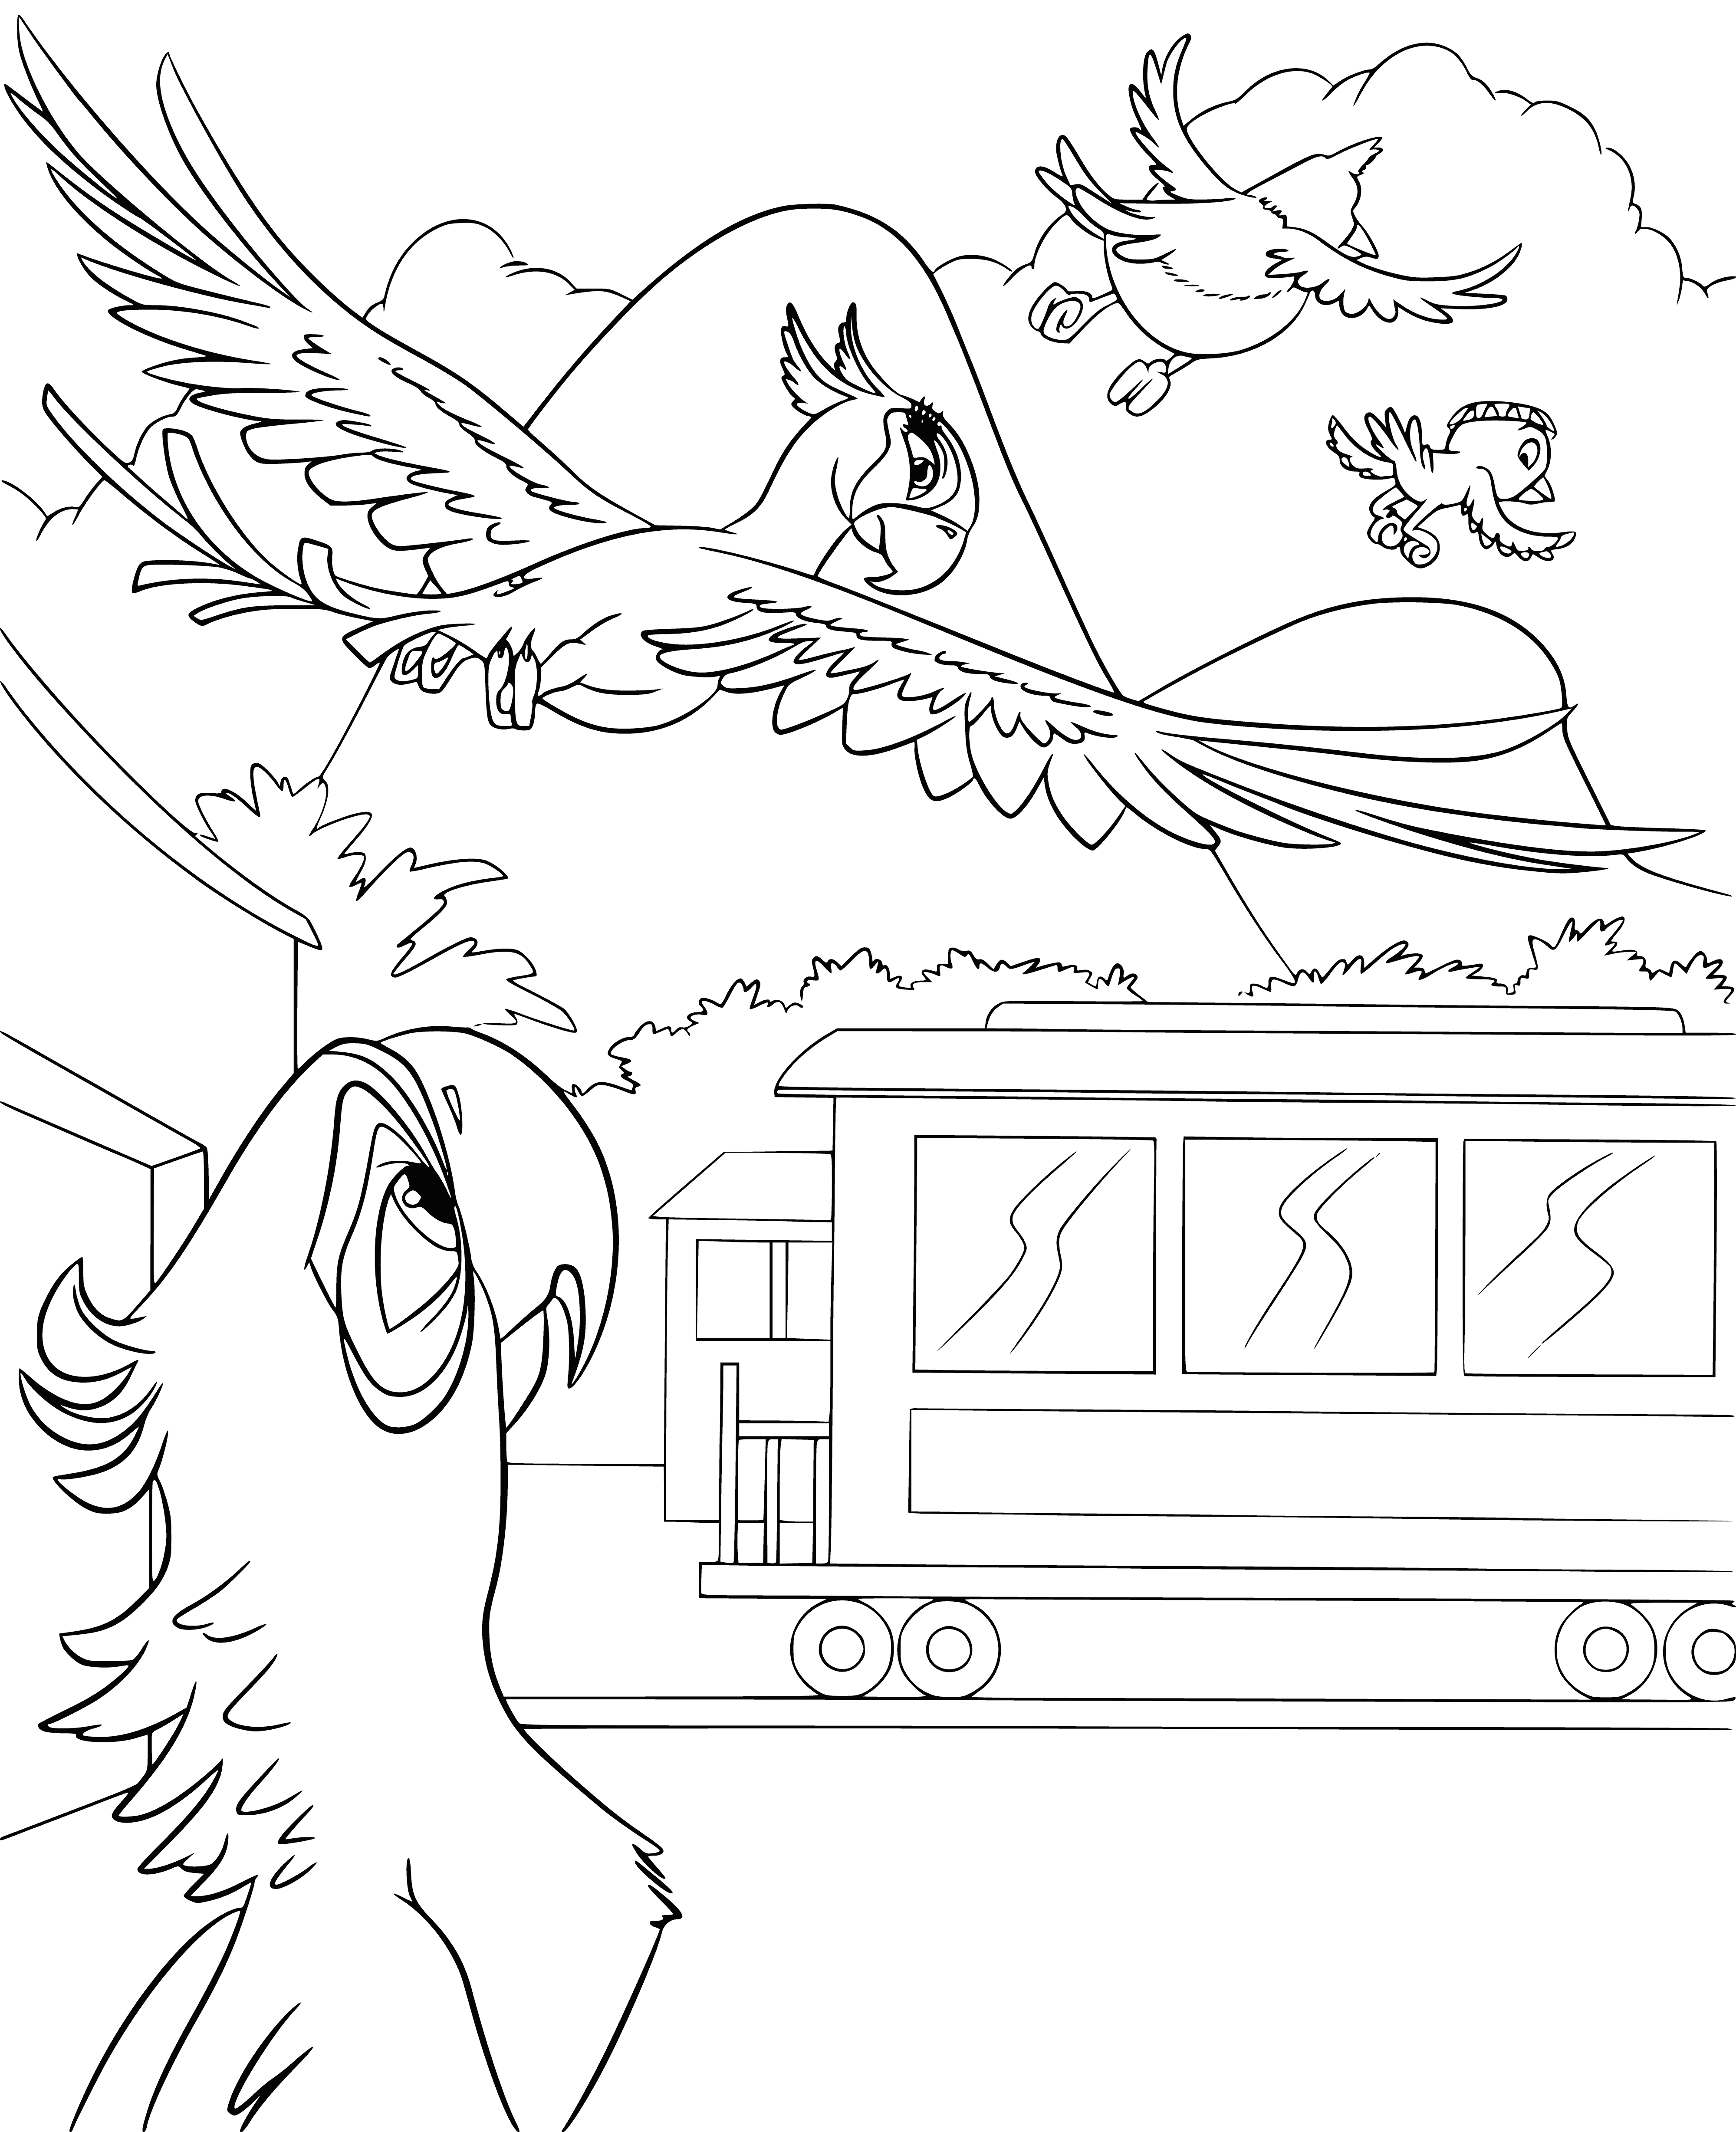 The pearl flies away coloring page